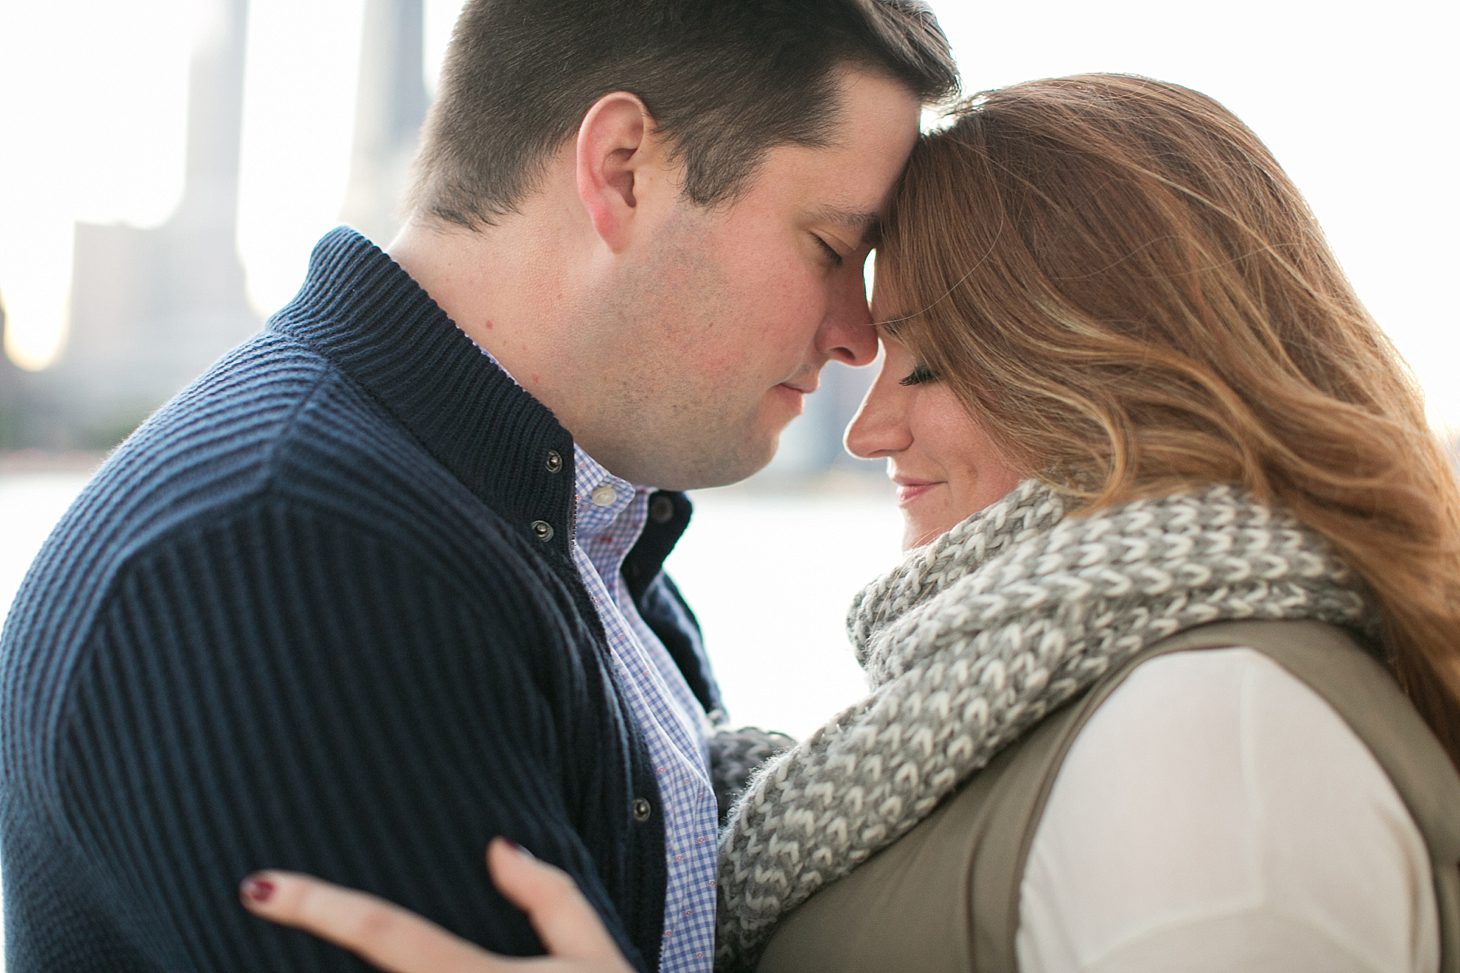 olive-park-engagement-photos-by-christy-tyler-photography_0030